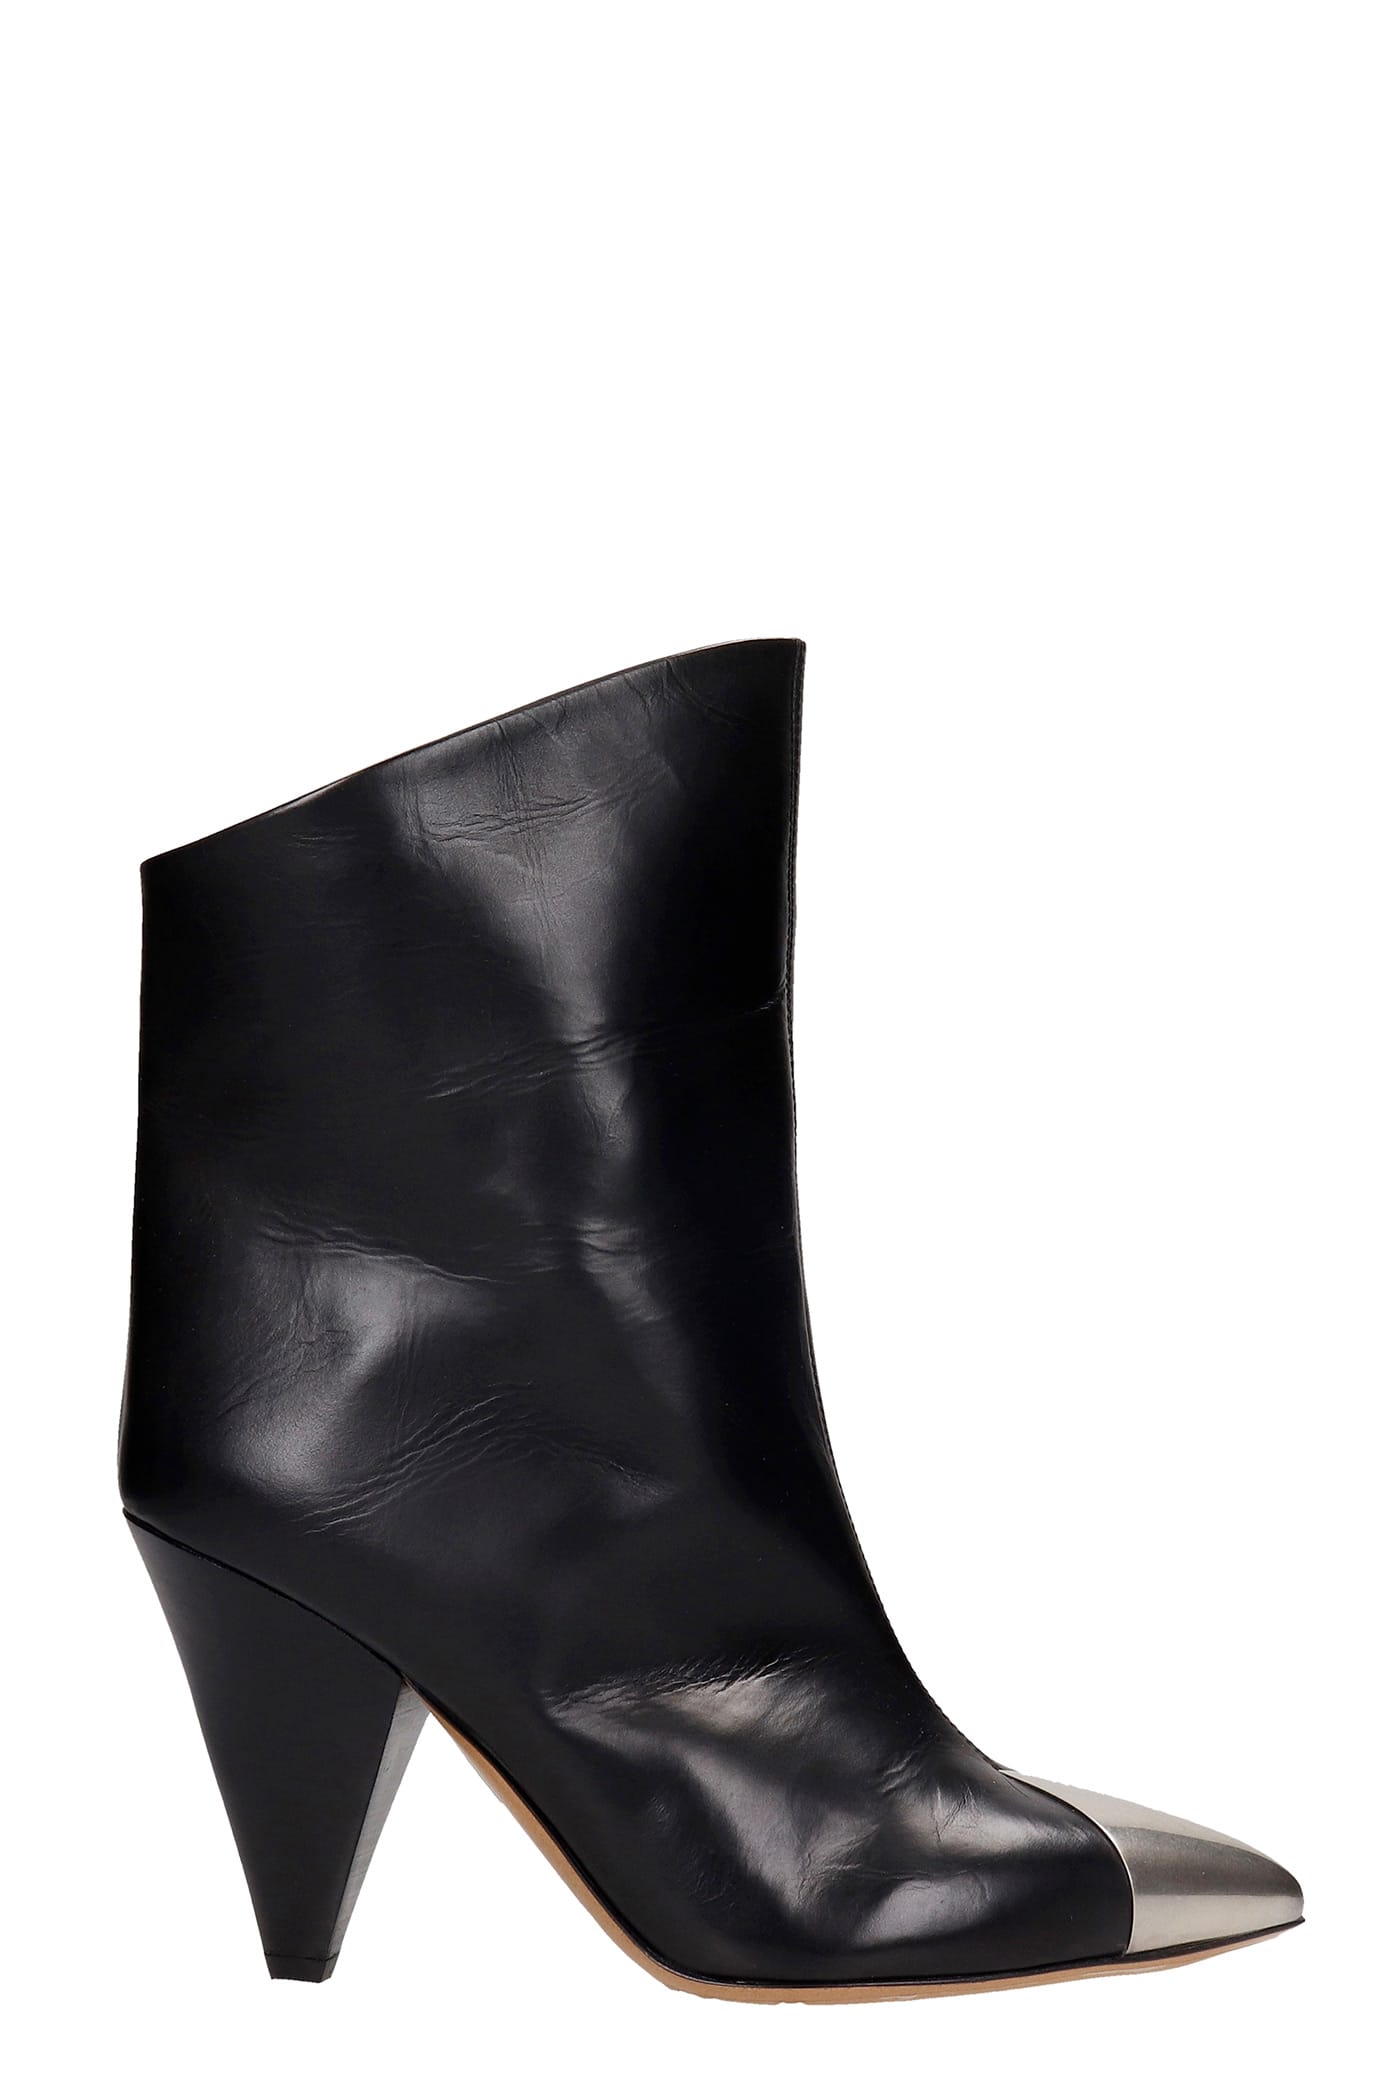 Isabel Marant Lapee High Heels Ankle Boots In Black Leather